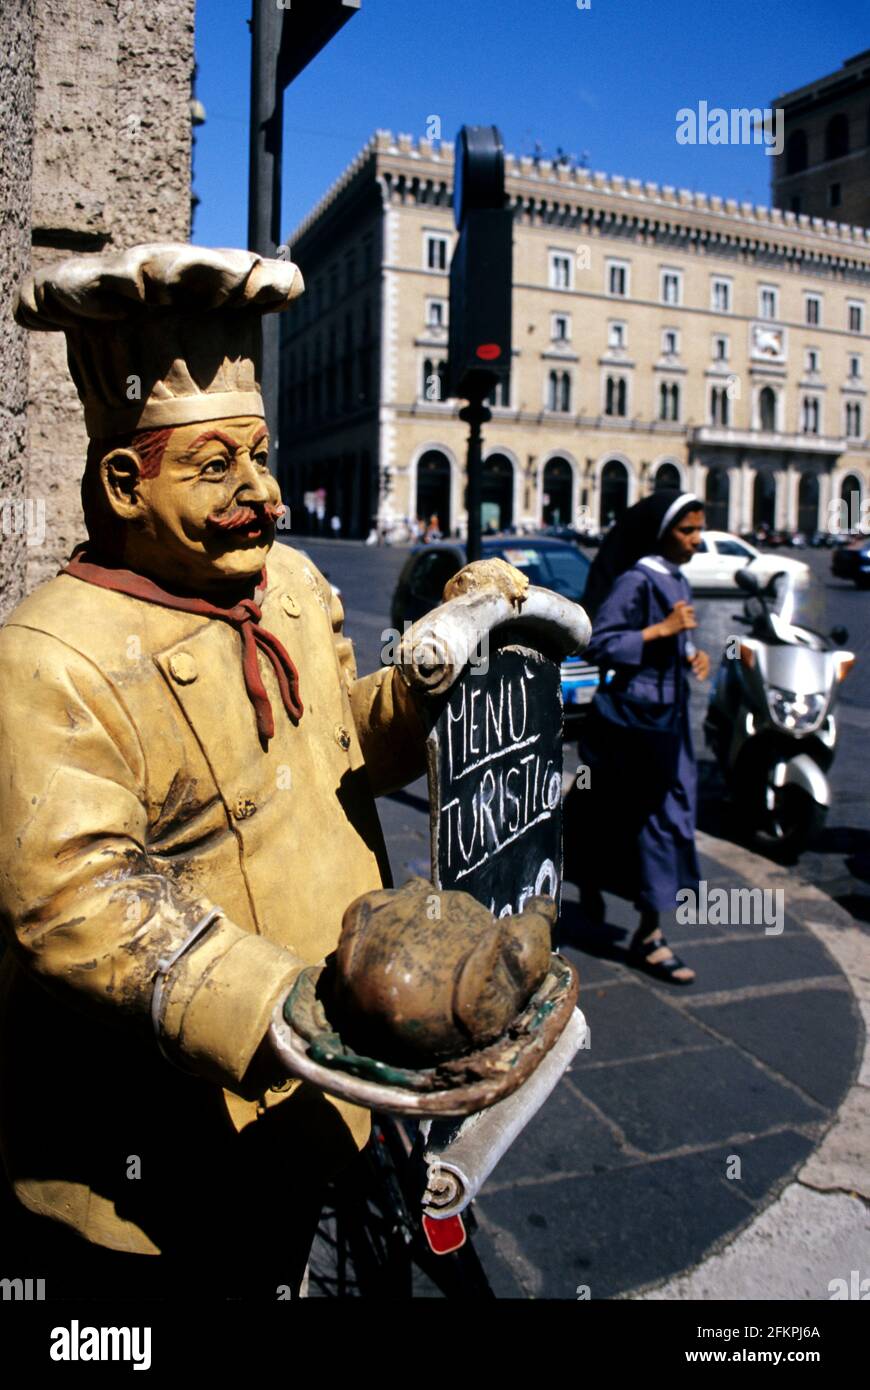 A nun wals by a 'Menu Turistico' restaurant sign at the Piazza Venezia, Rome, Italy. Stock Photo